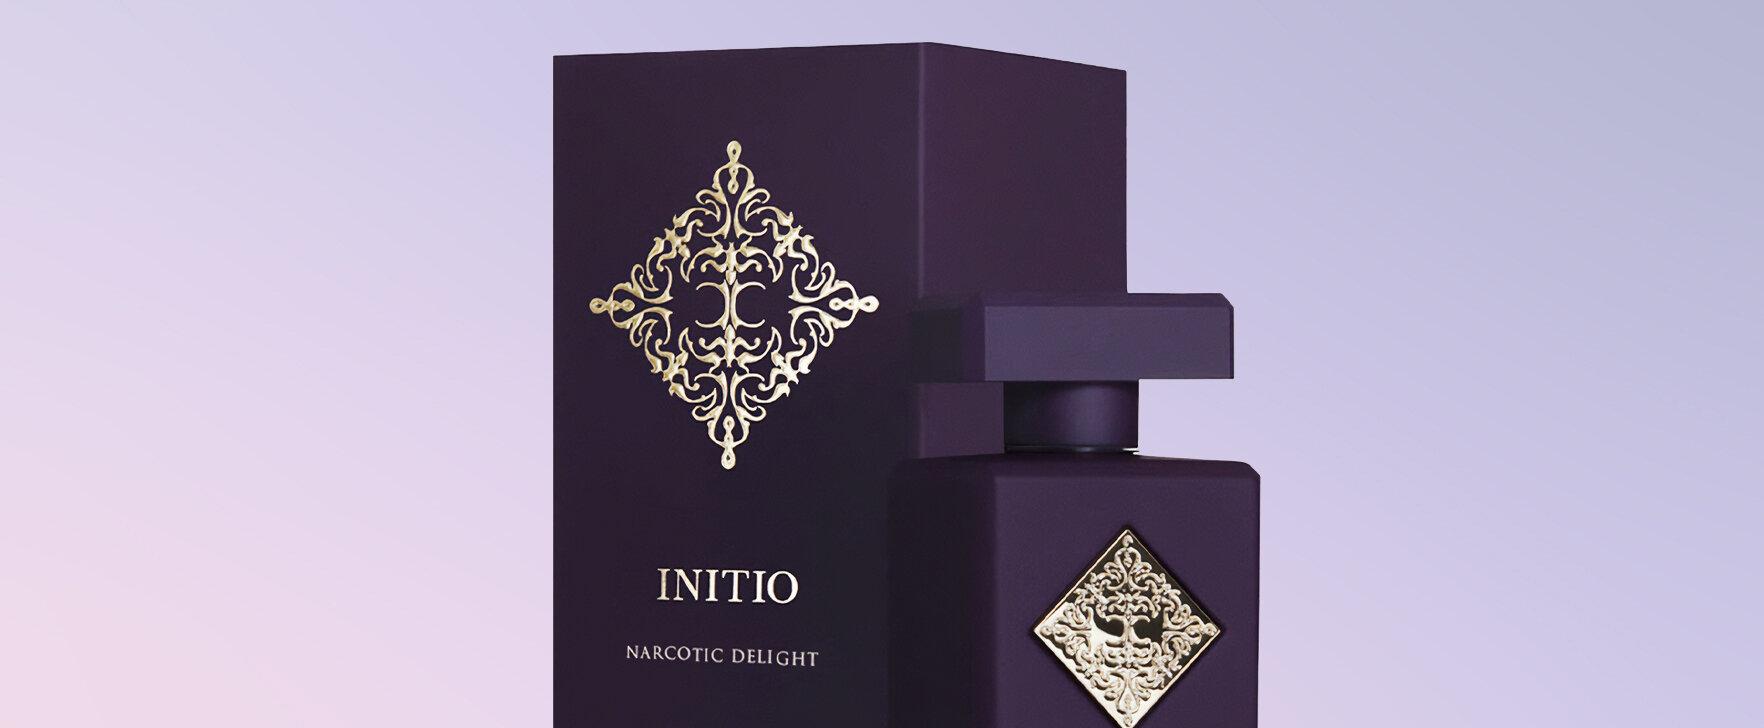 A Sensual Dash of Provocation: The New Eau de Parfum Narcotic Delight From Initio